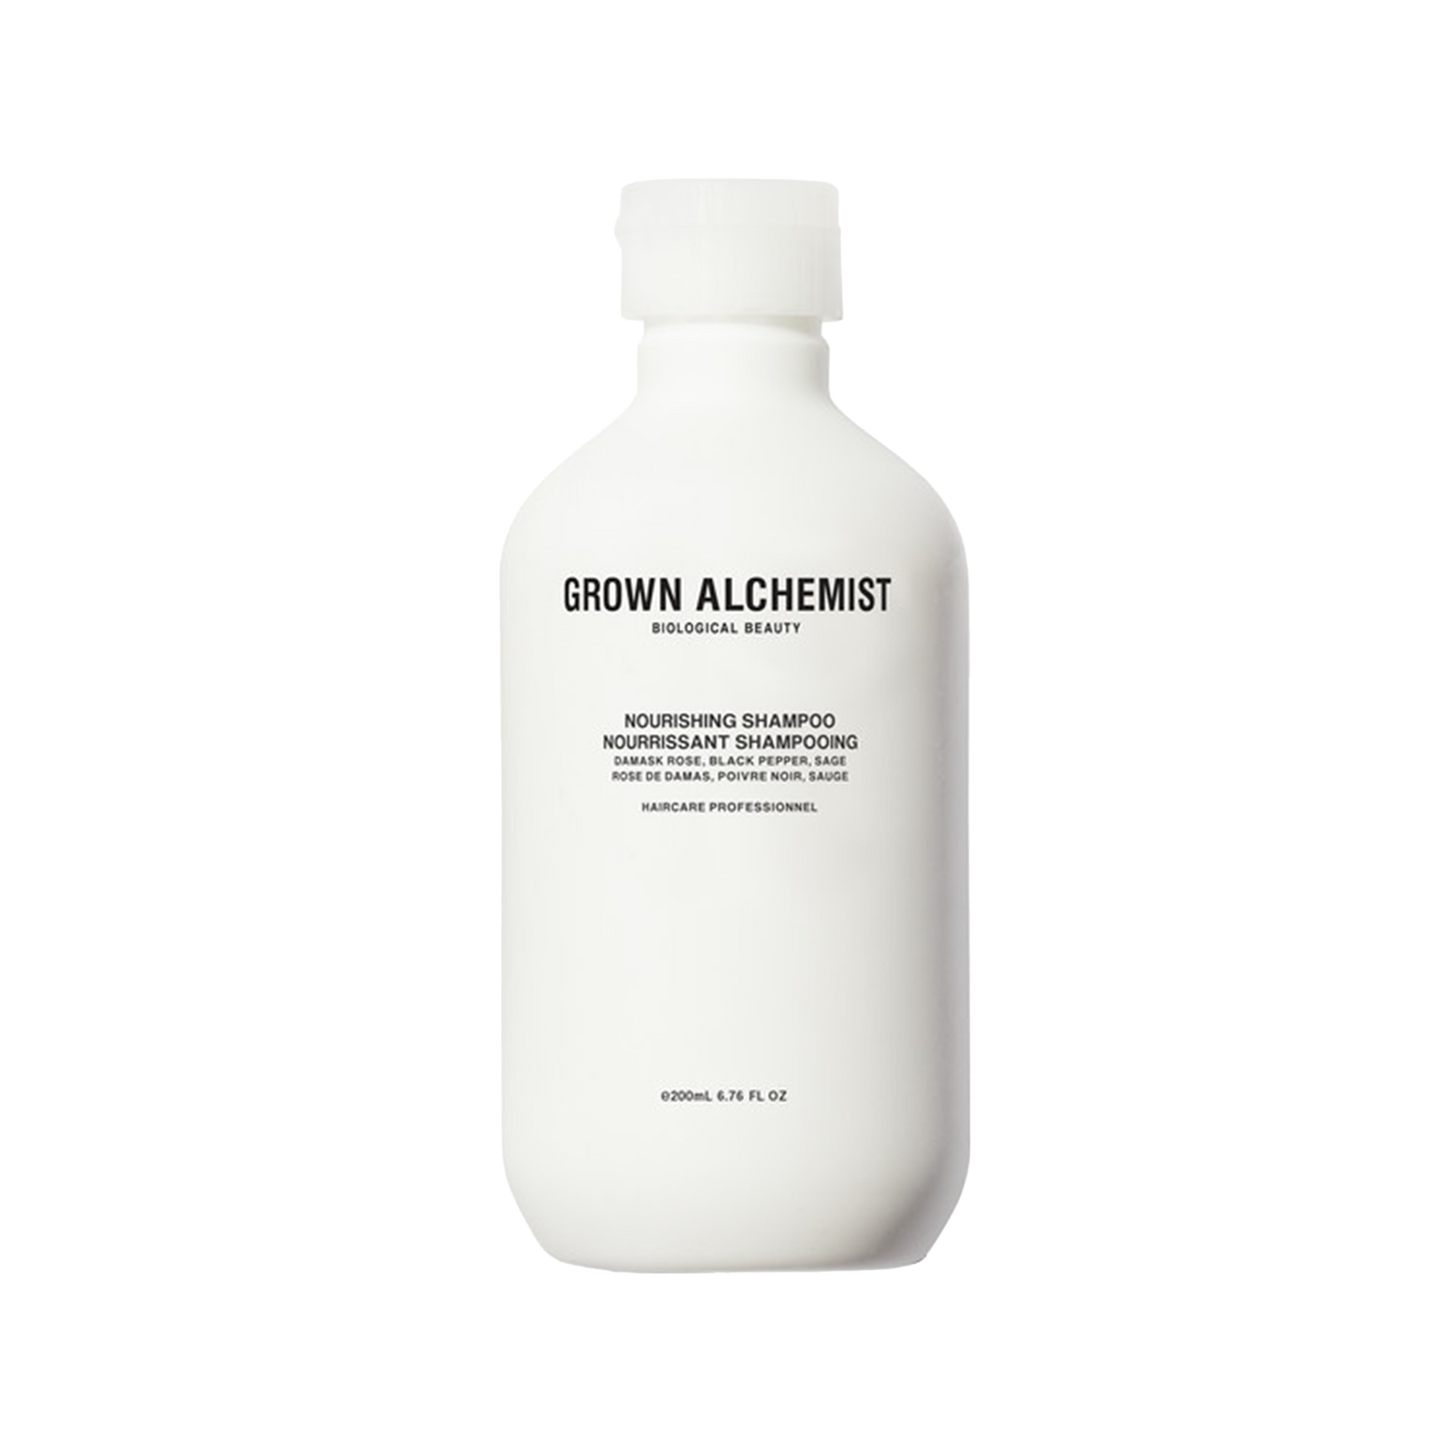 Grown Alchemist Nourishing - Shampoo 0.6: This gentle nutrient-rich formulation leaves hair clean, shiny and nourished. Perfect for daily use, it provides manageability and strength without stripping hair or drying the scalp.